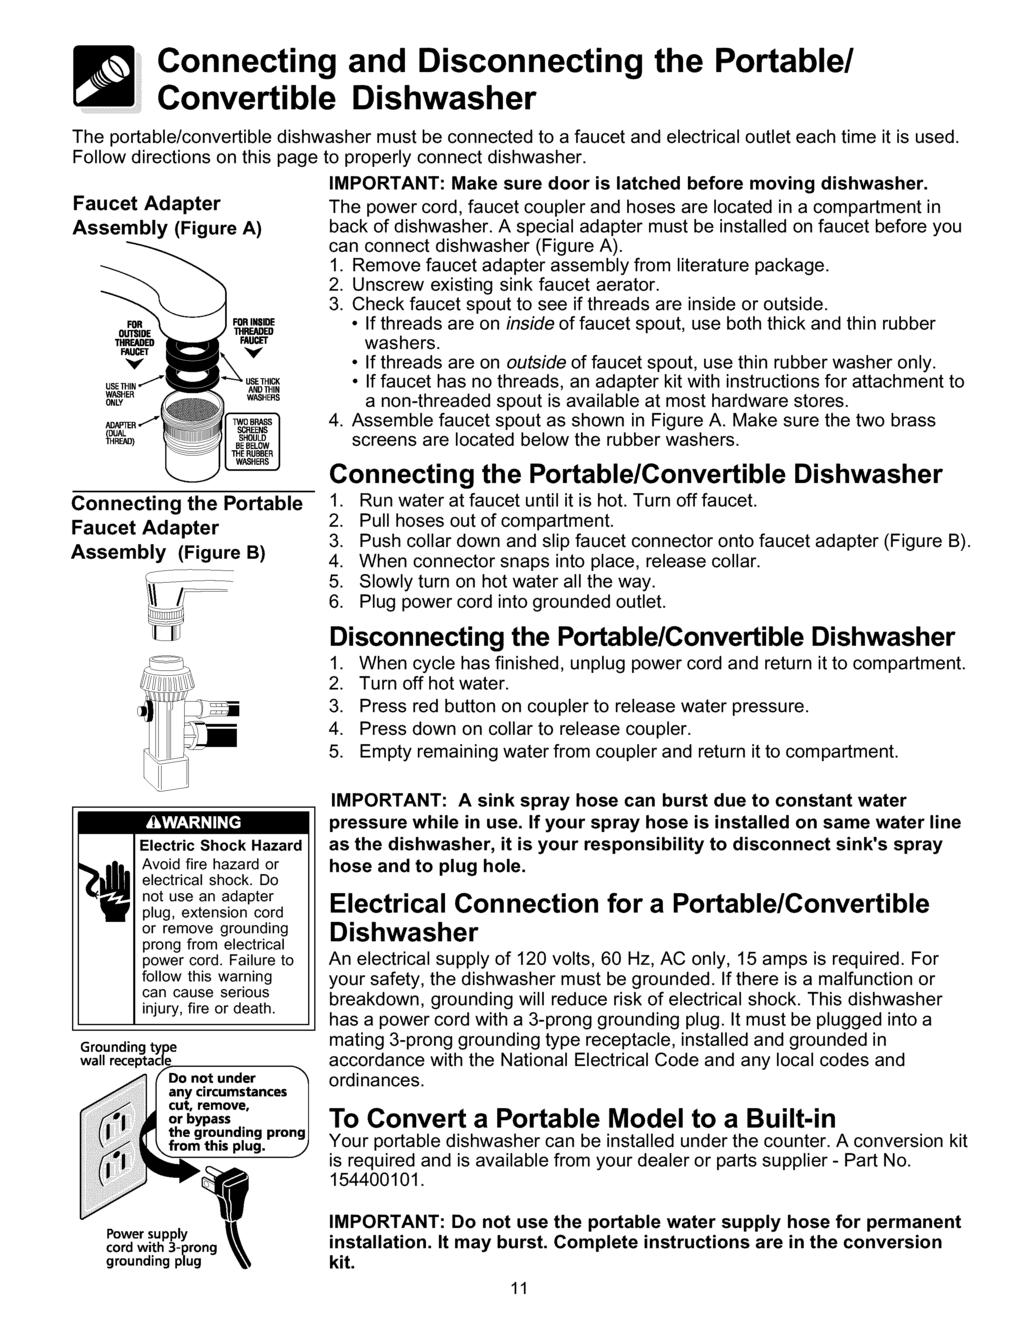 Connecting and Disconnecting the Portable/ Convertible Dishwasher The portable/convertible dishwasher must be connected to a faucet and electrical outlet each time it is used.